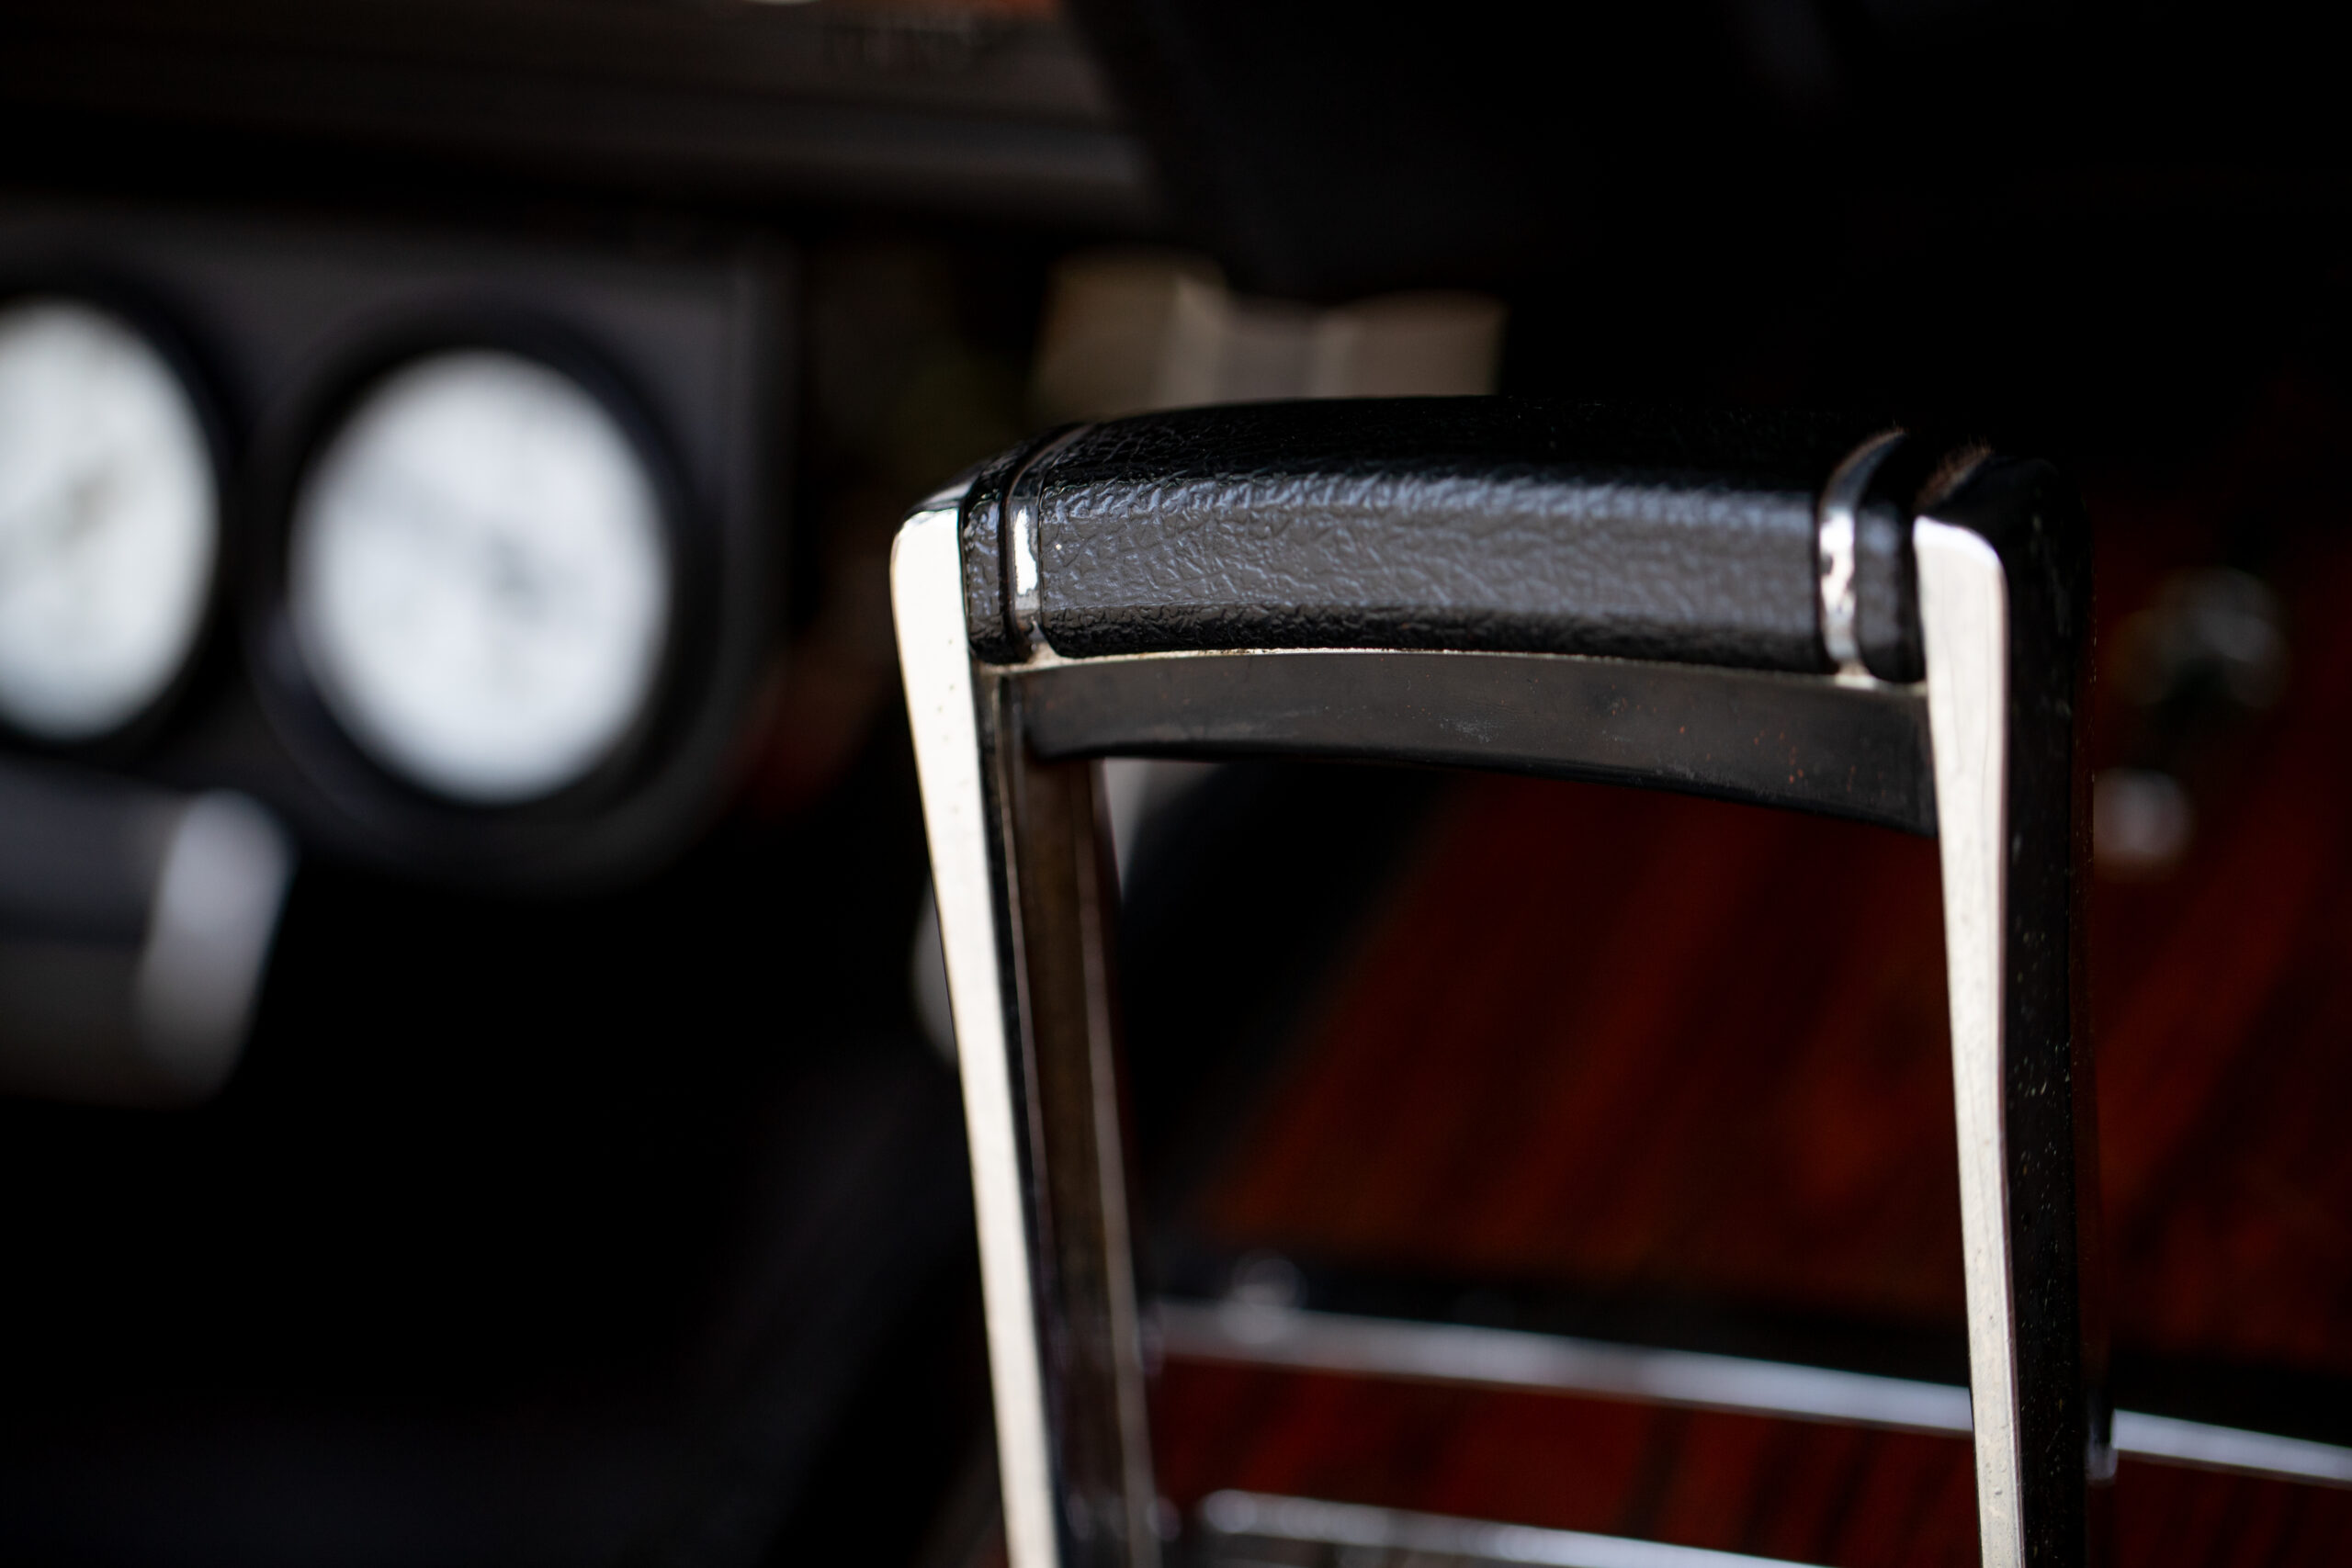 Close-up of a car's gear shifter with a leather handle, metallic accents, and part of the dashboard with gauges visible in the background.